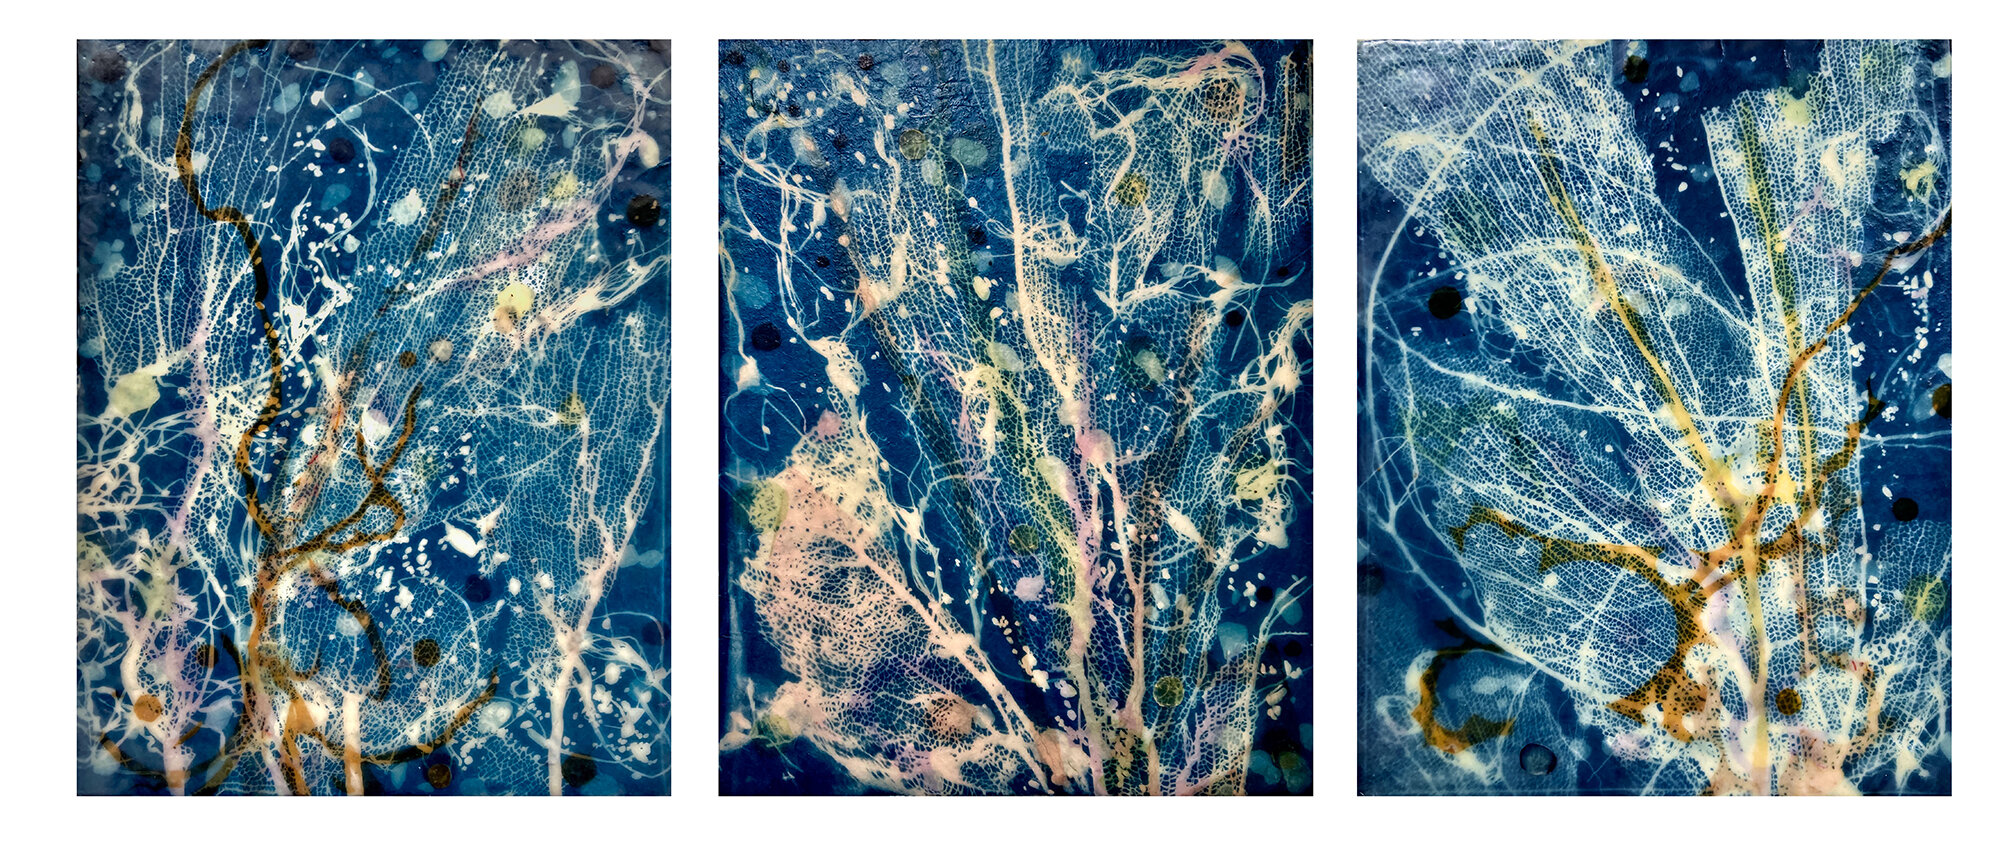   Tobago Coral Sea Triptych, 2020    Cyanotypes on Japanese rice paper, colored Japanese rice papers, wax, encaustic board   3 images 11" x 14"  